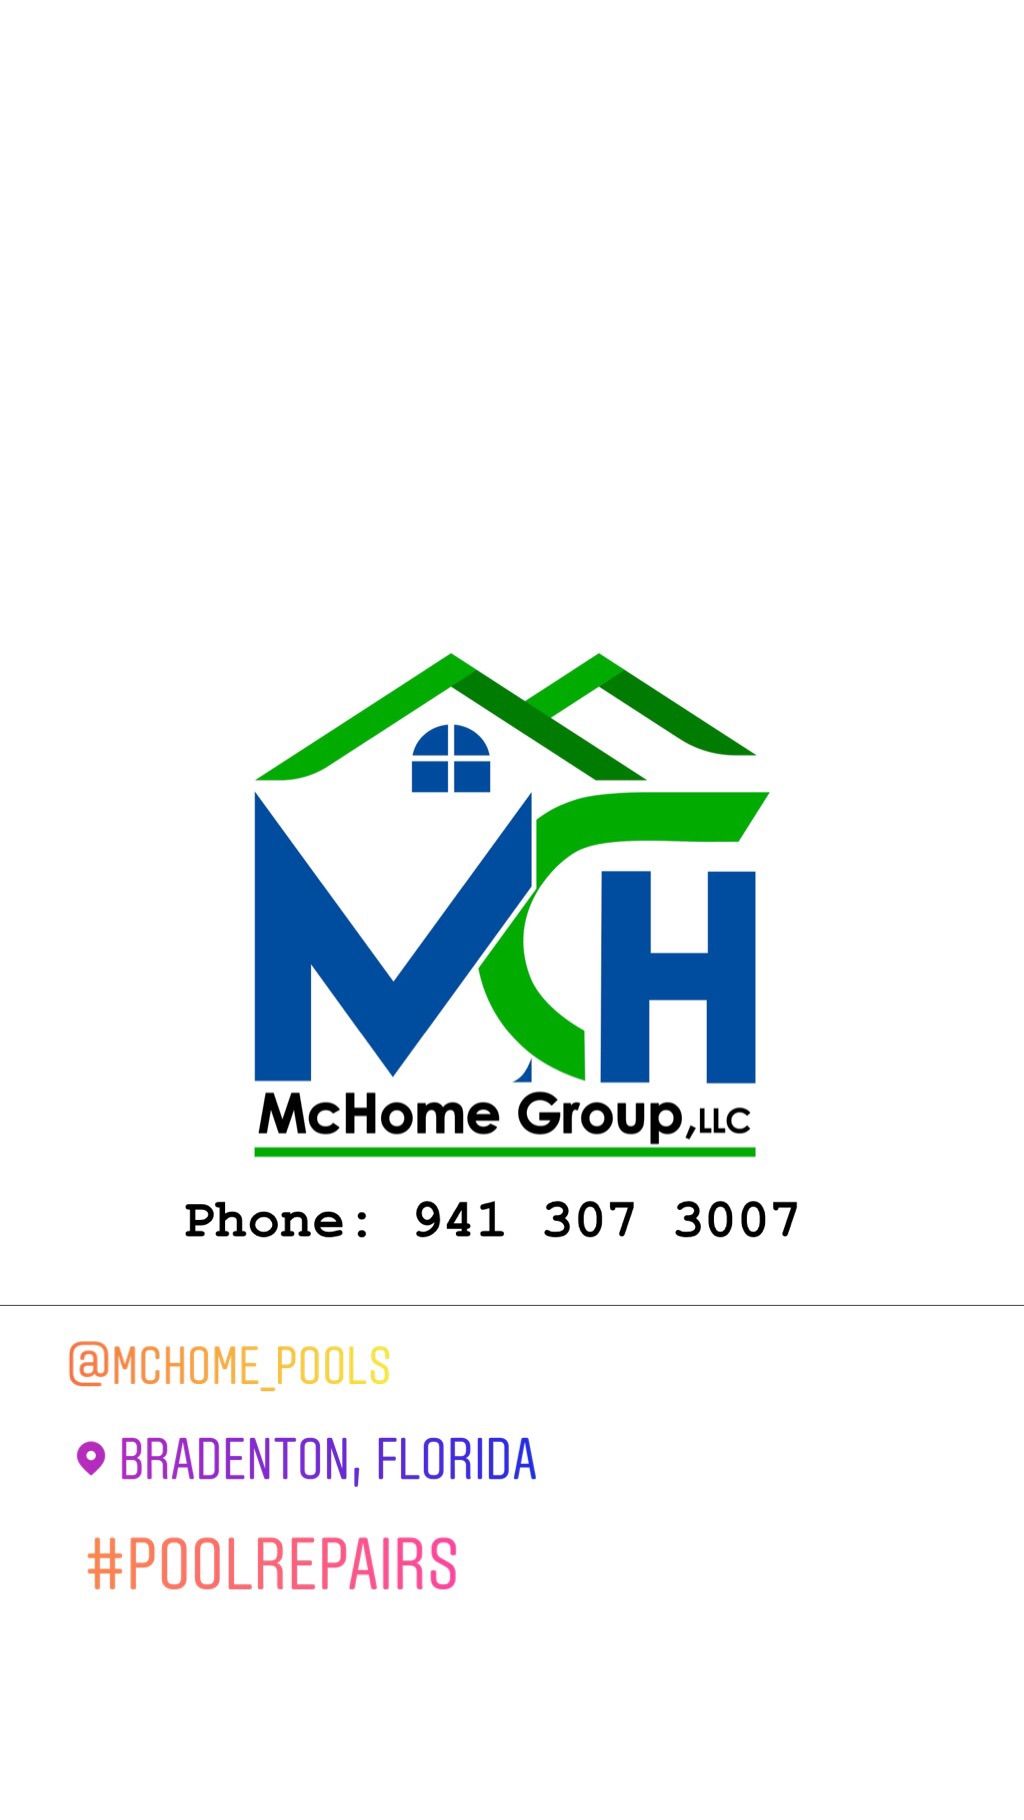 McHome Group and Pool Contractors